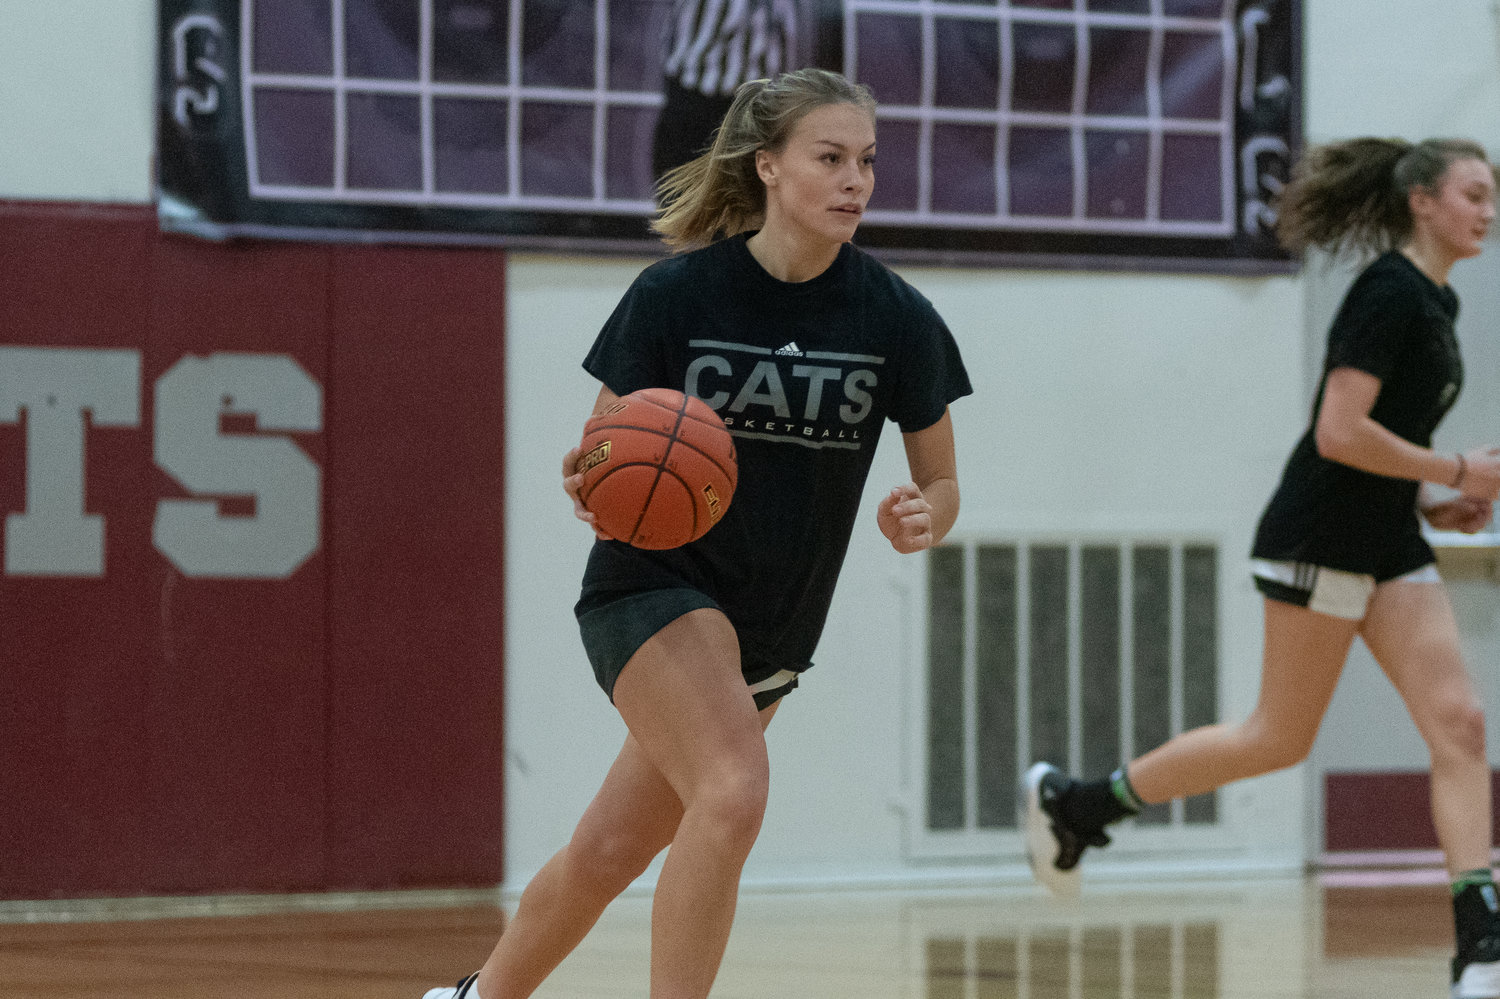 W.F. West guard Kyla McCallum dribbles up the court in a scrimmage during the first day of practice Nov. 15.